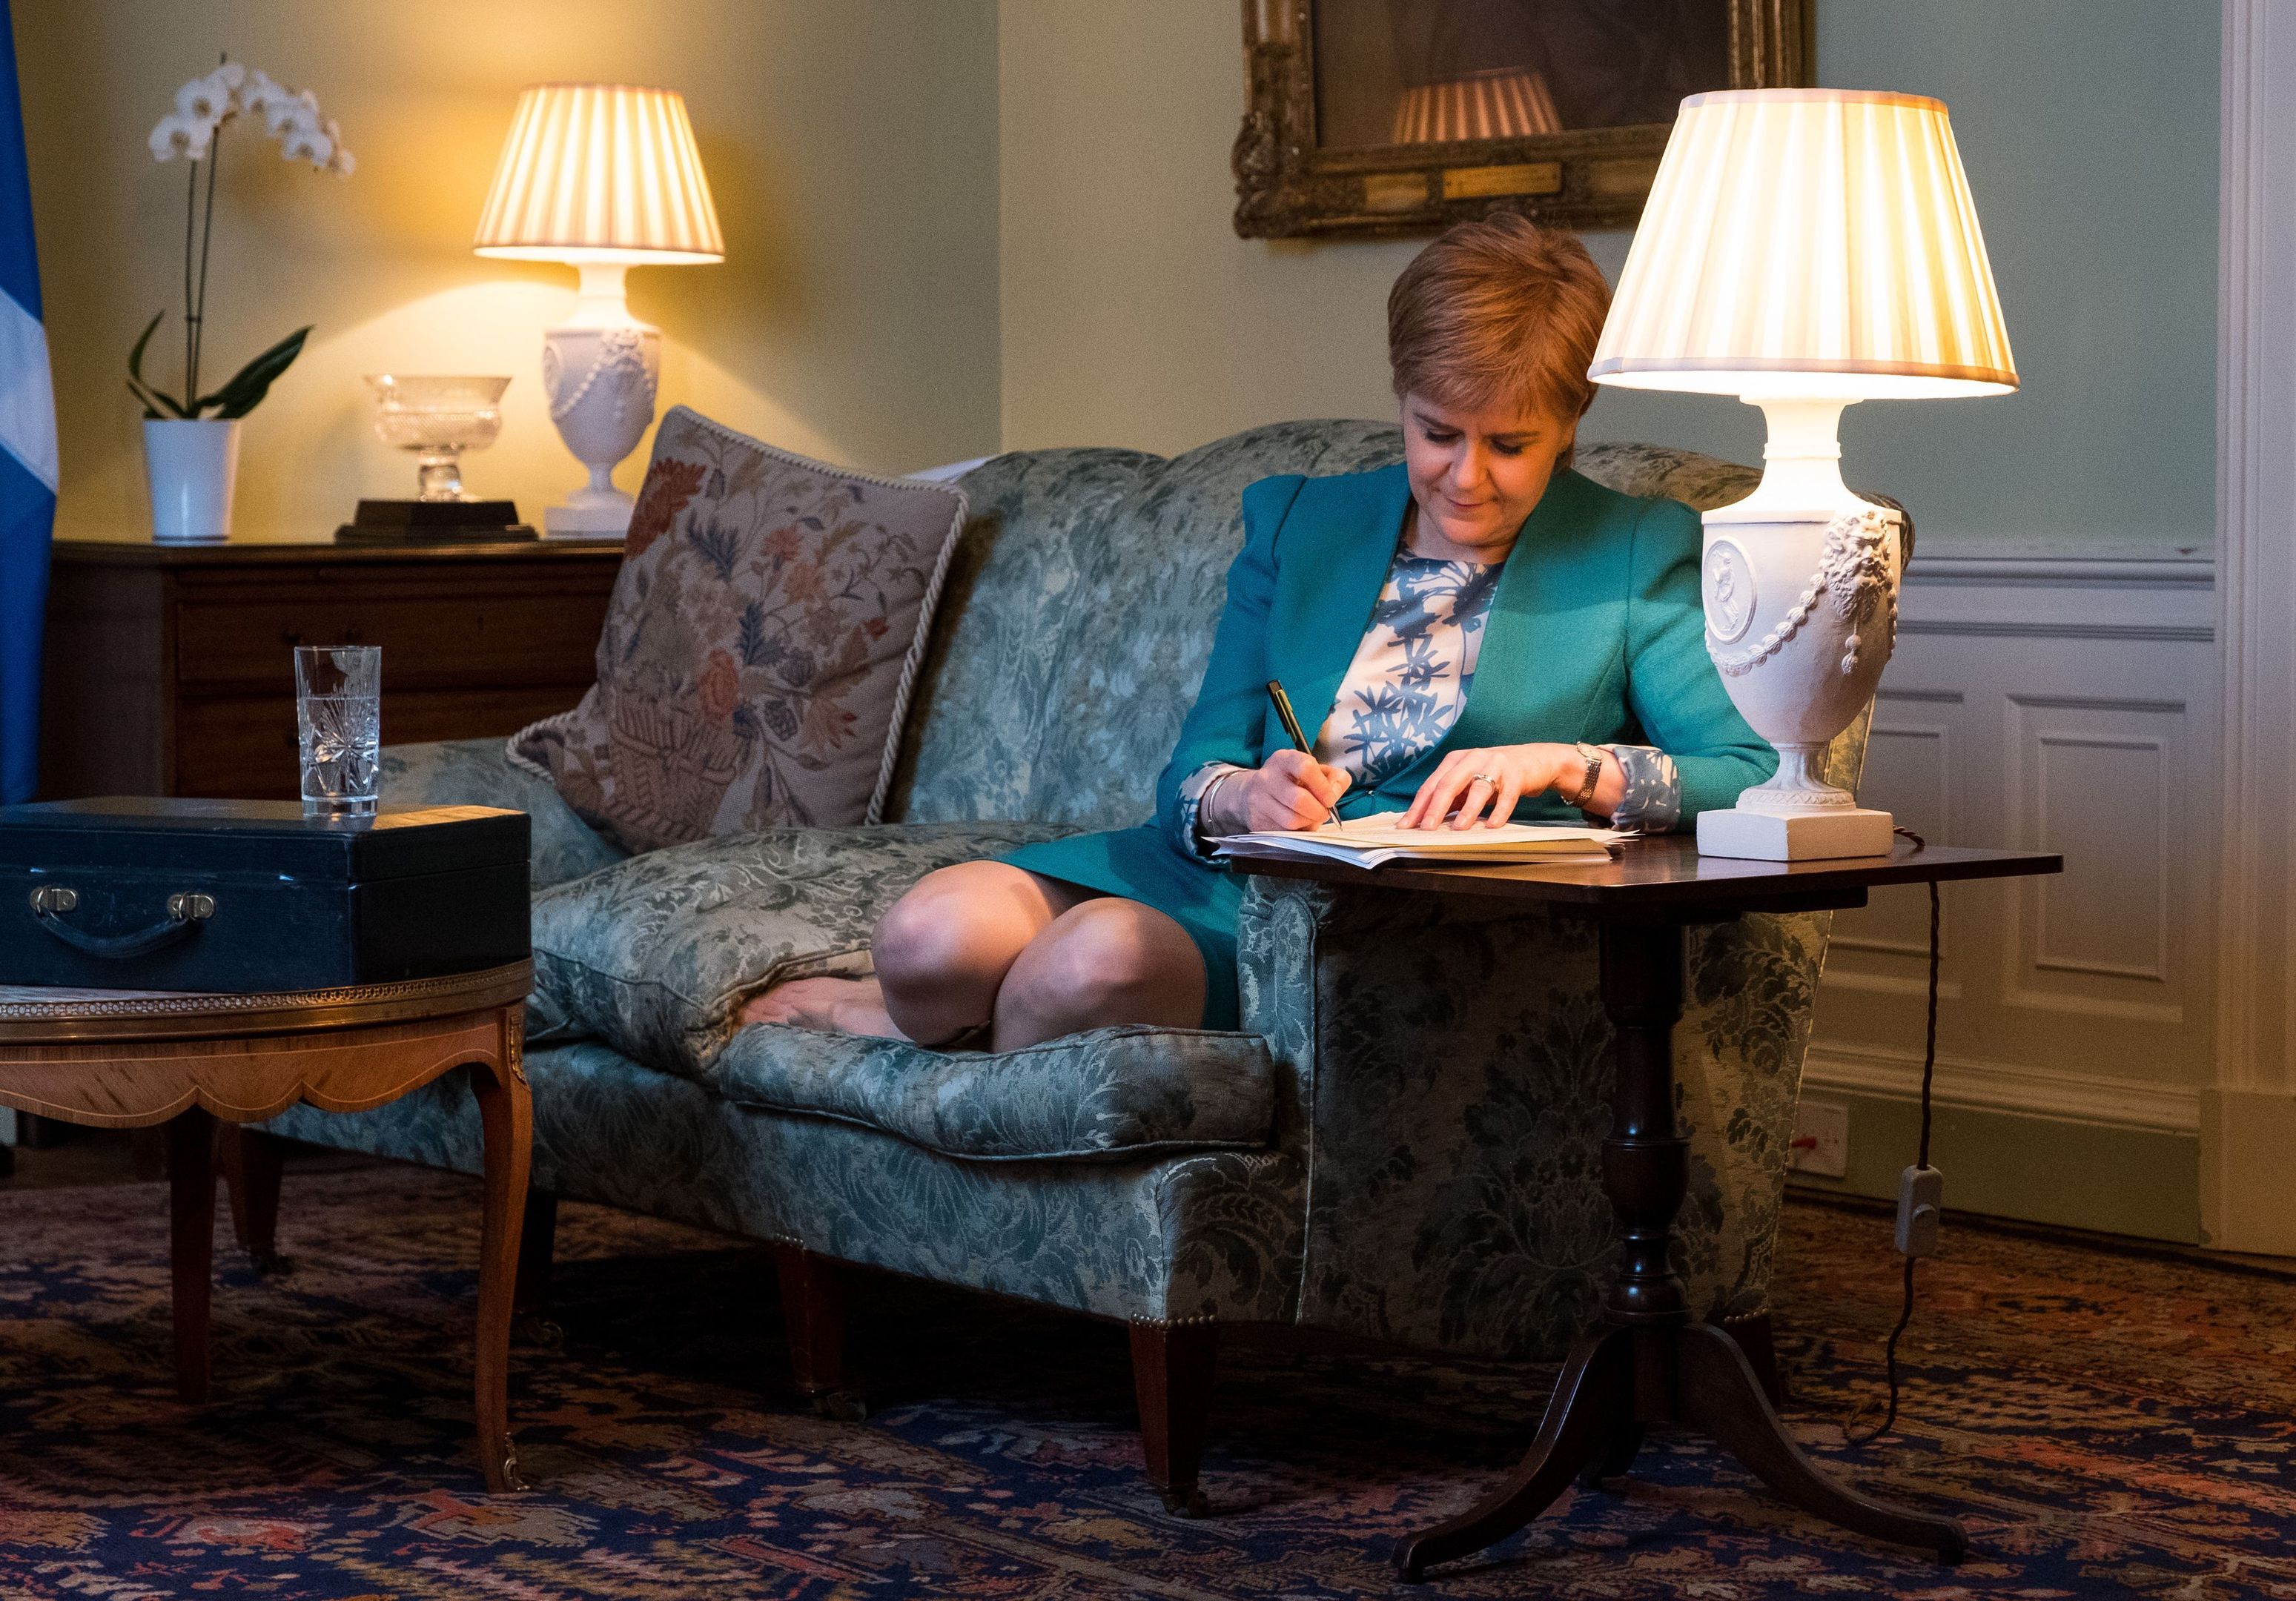 Nicola Sturgeon working on the final draft of her Section 30 letter (Scottish Government/PA Wire)